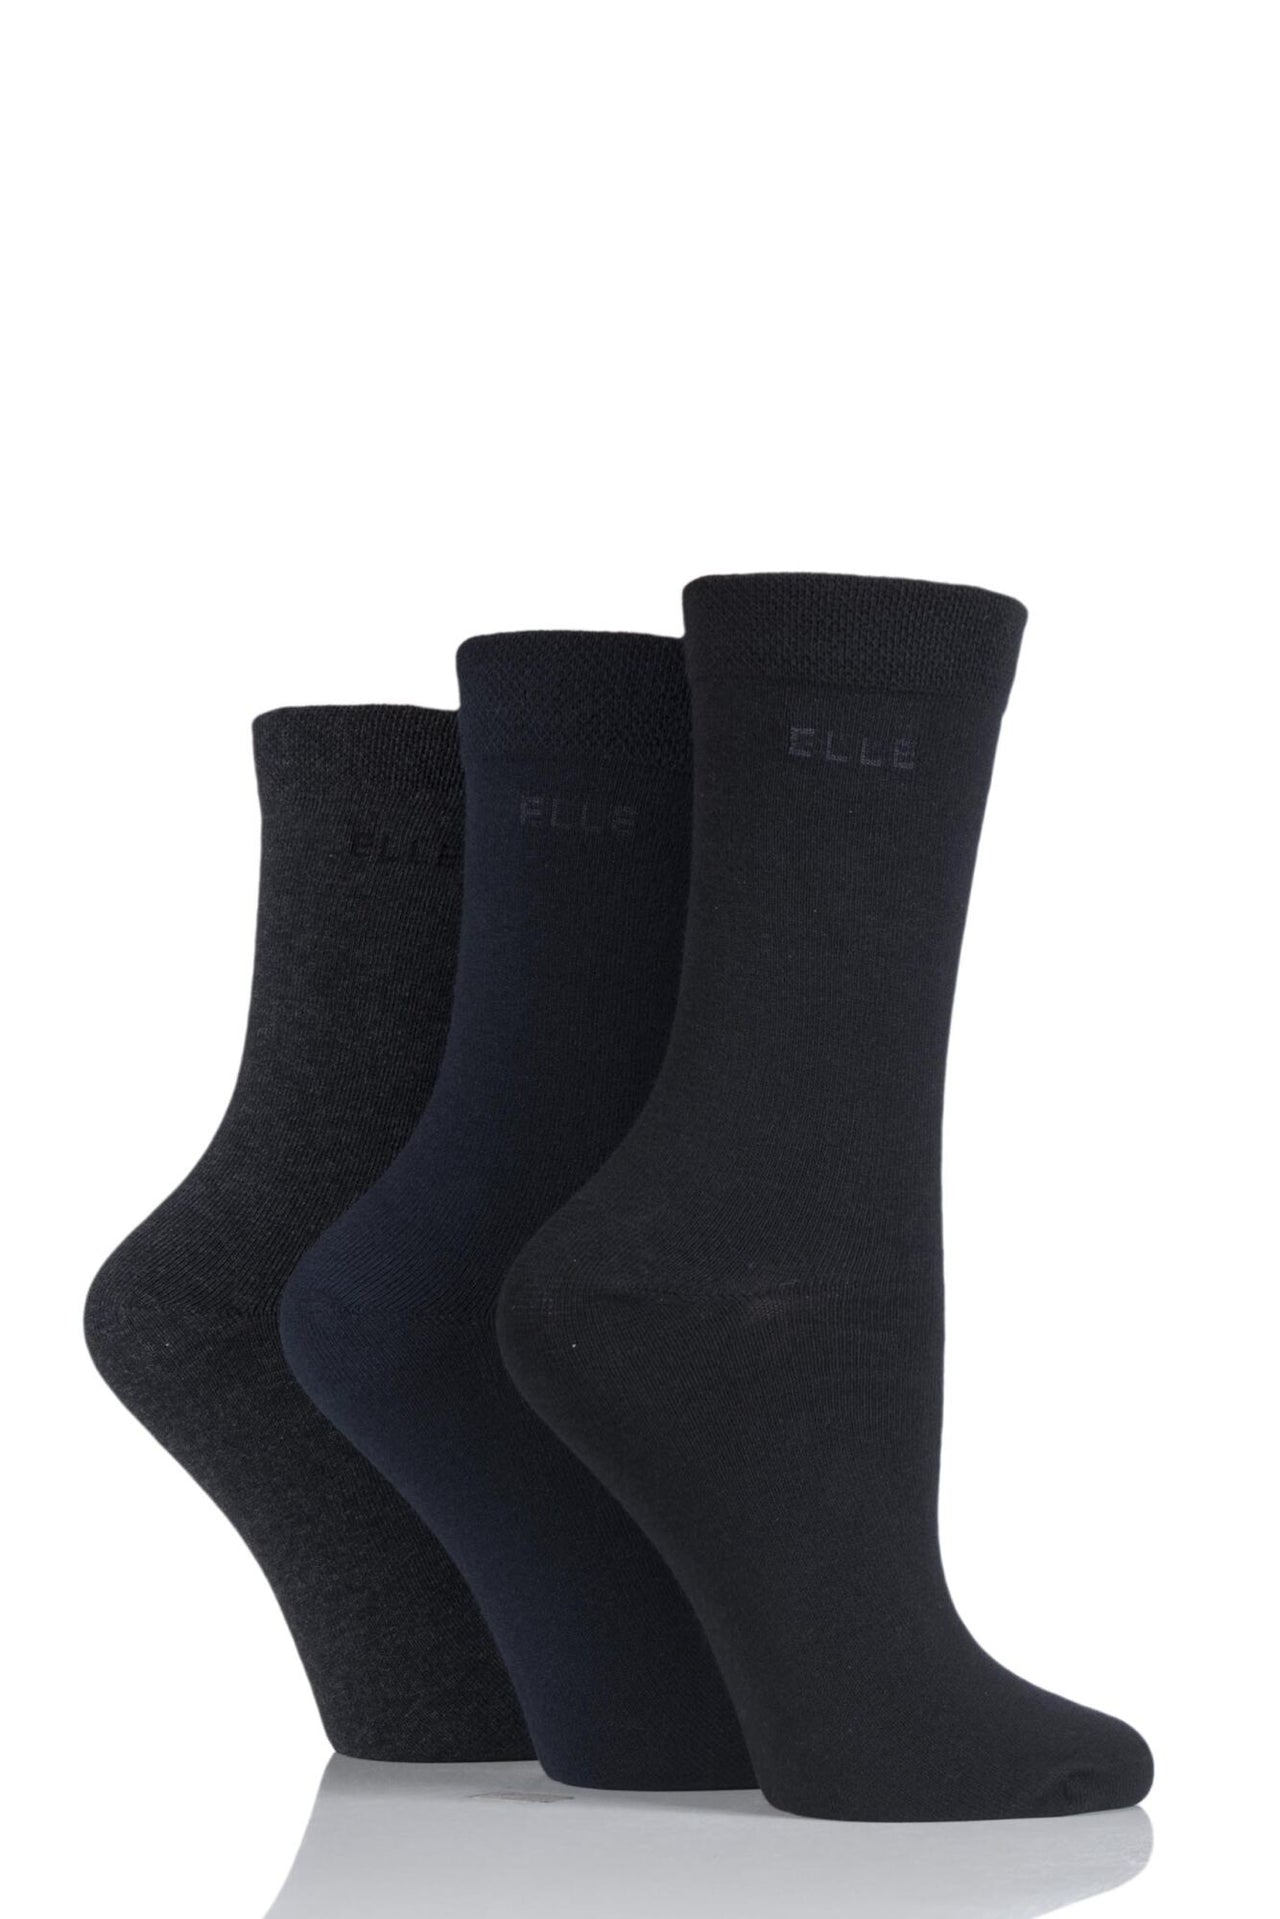 Elle 3 Pairs of Combed Cotton Black, Navy, Charcoal Mix Socks